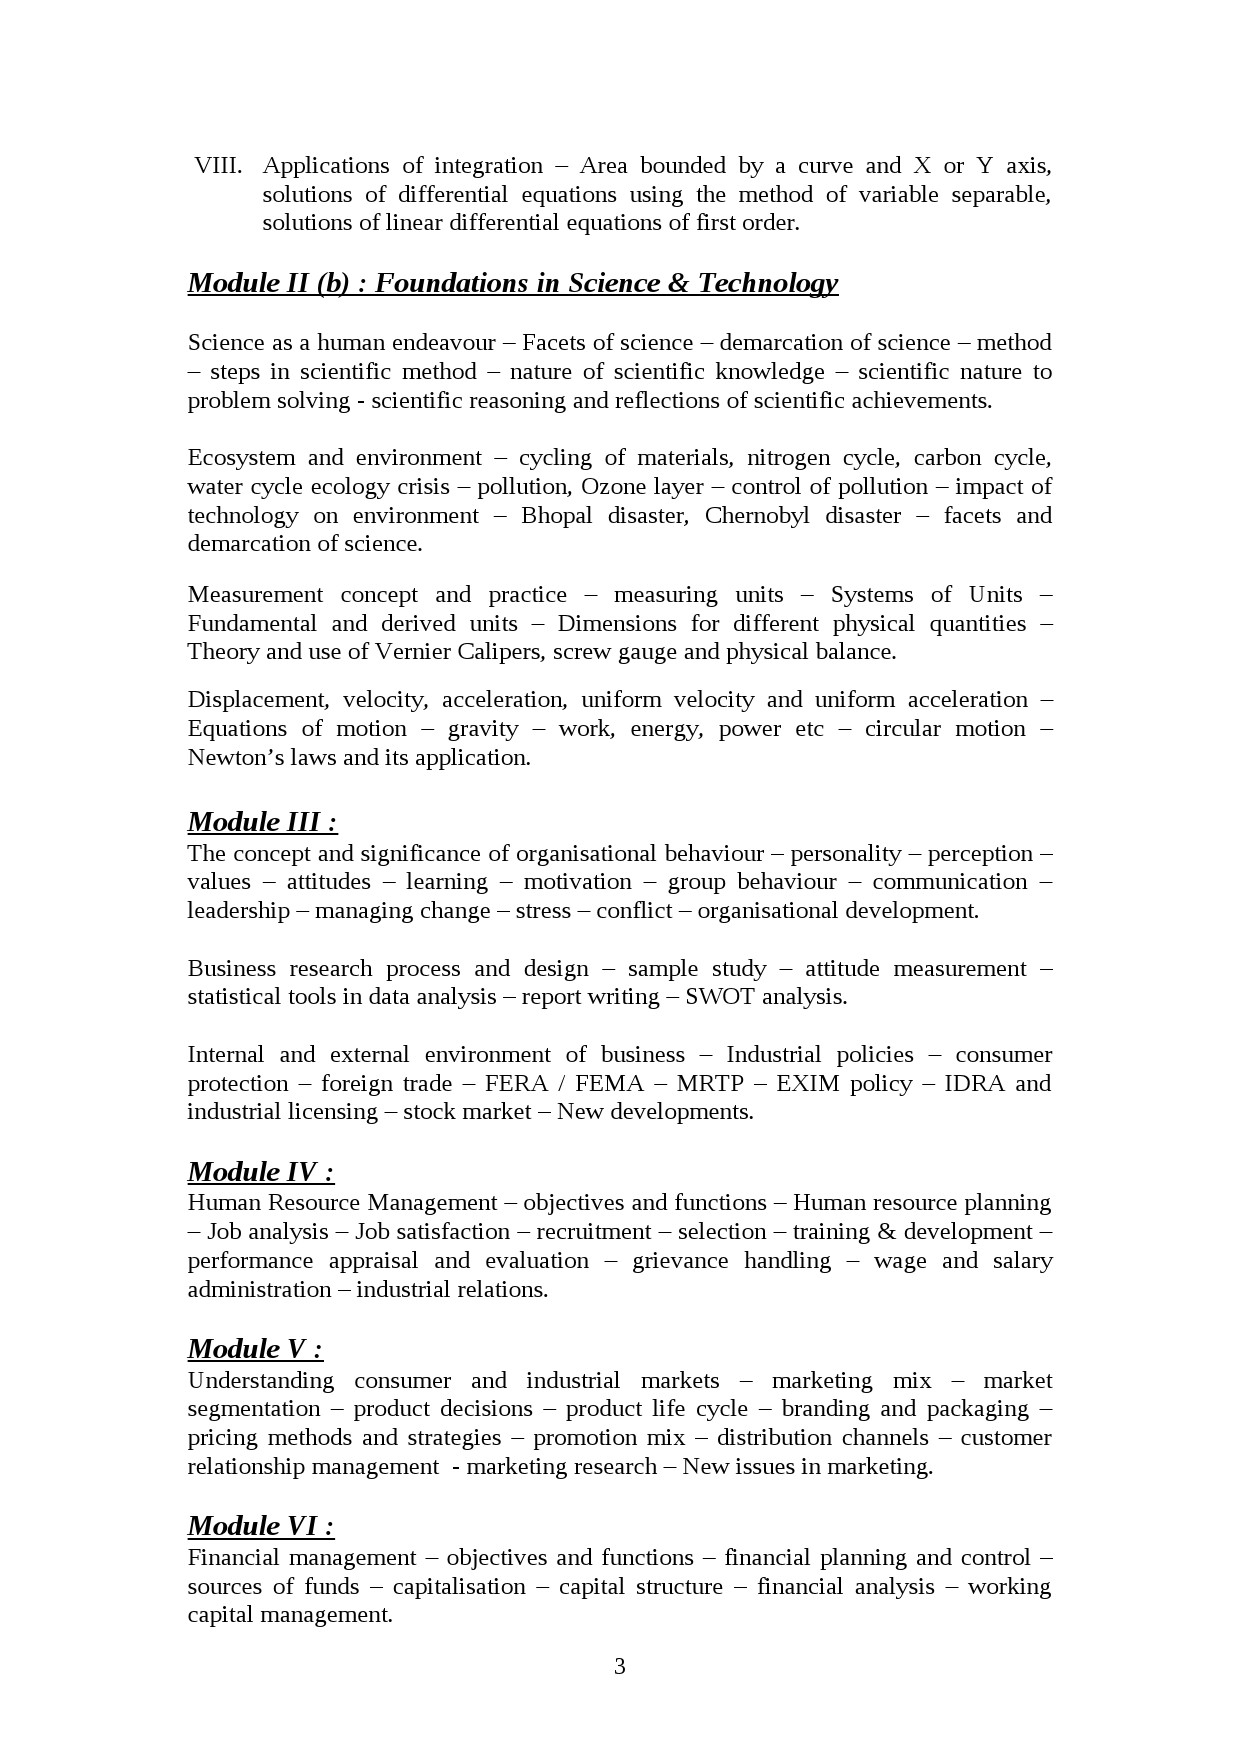 Computer Application And Business Management Lecturer in Polytechnic Syllabus - Notification Image 3